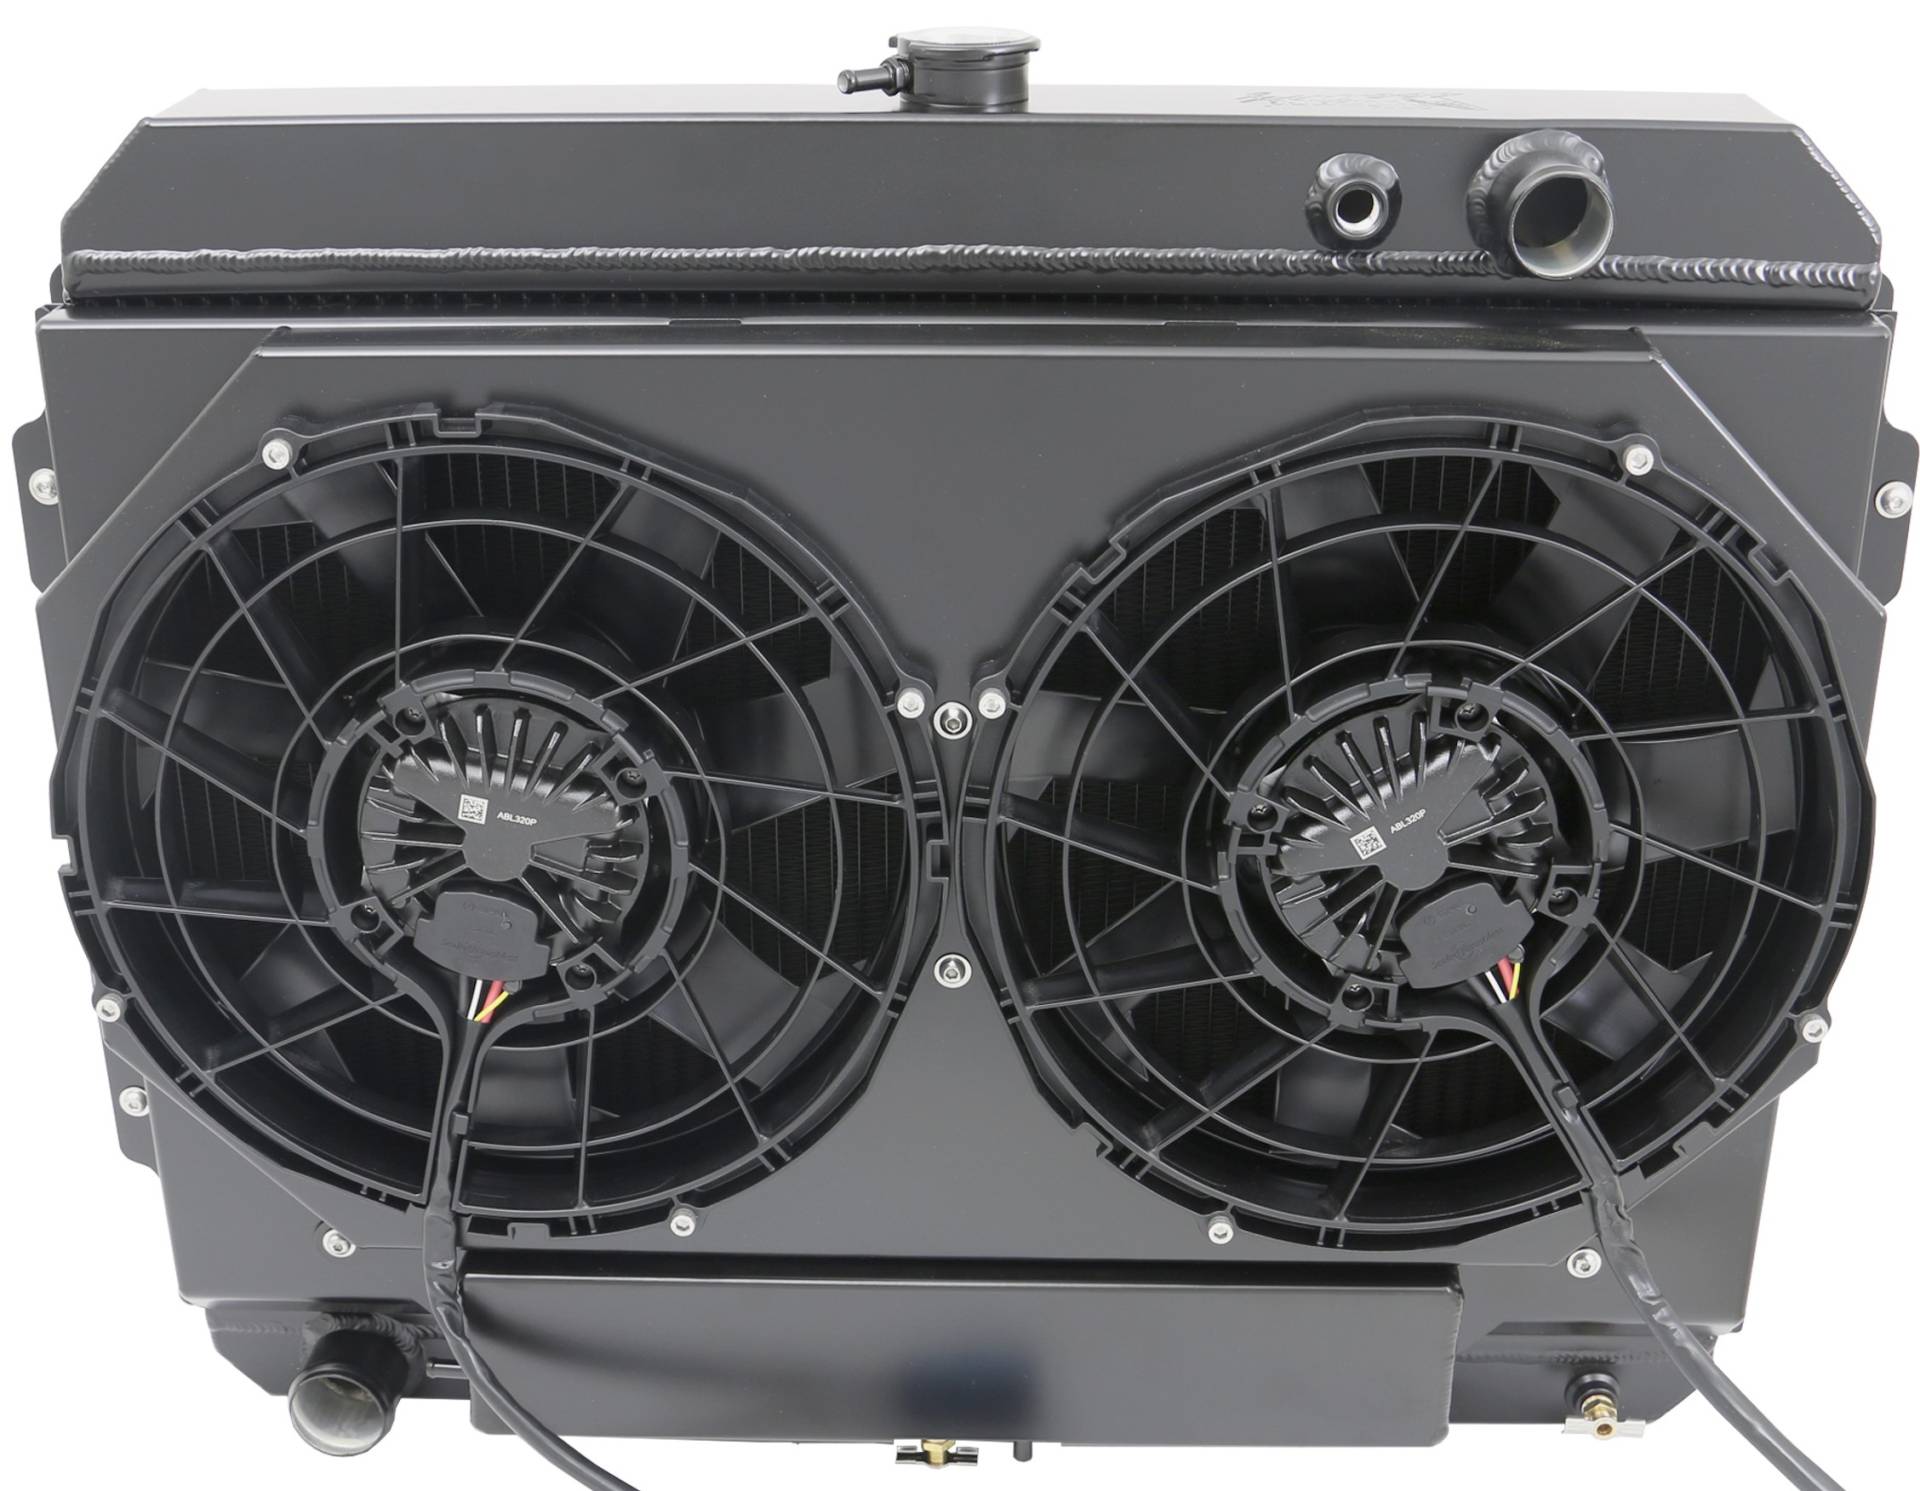 Wizard Cooling Inc - Wizard Cooling - 1966-1969 26" (B/B) Mopar Applications Aluminum Radiator (w/ BRUSHLESS FAN PACKAGE) - 1640-202BLACPC